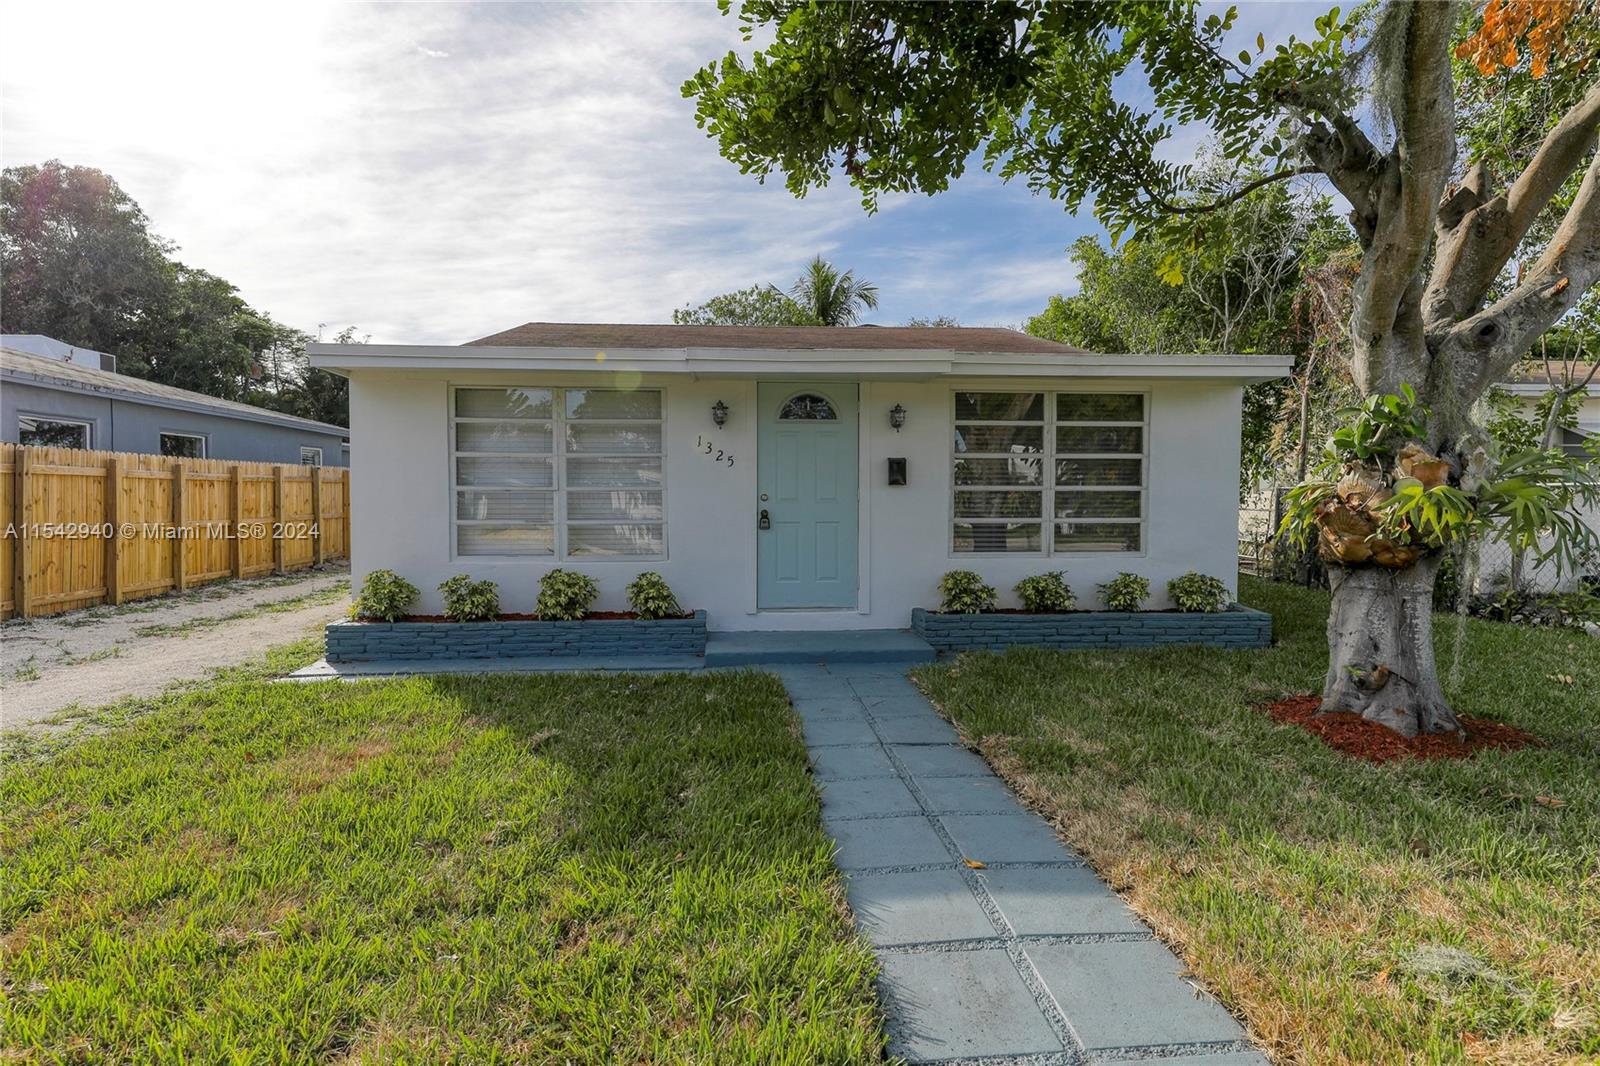 Photo of 1325 NE 2nd Ave in Fort Lauderdale, FL